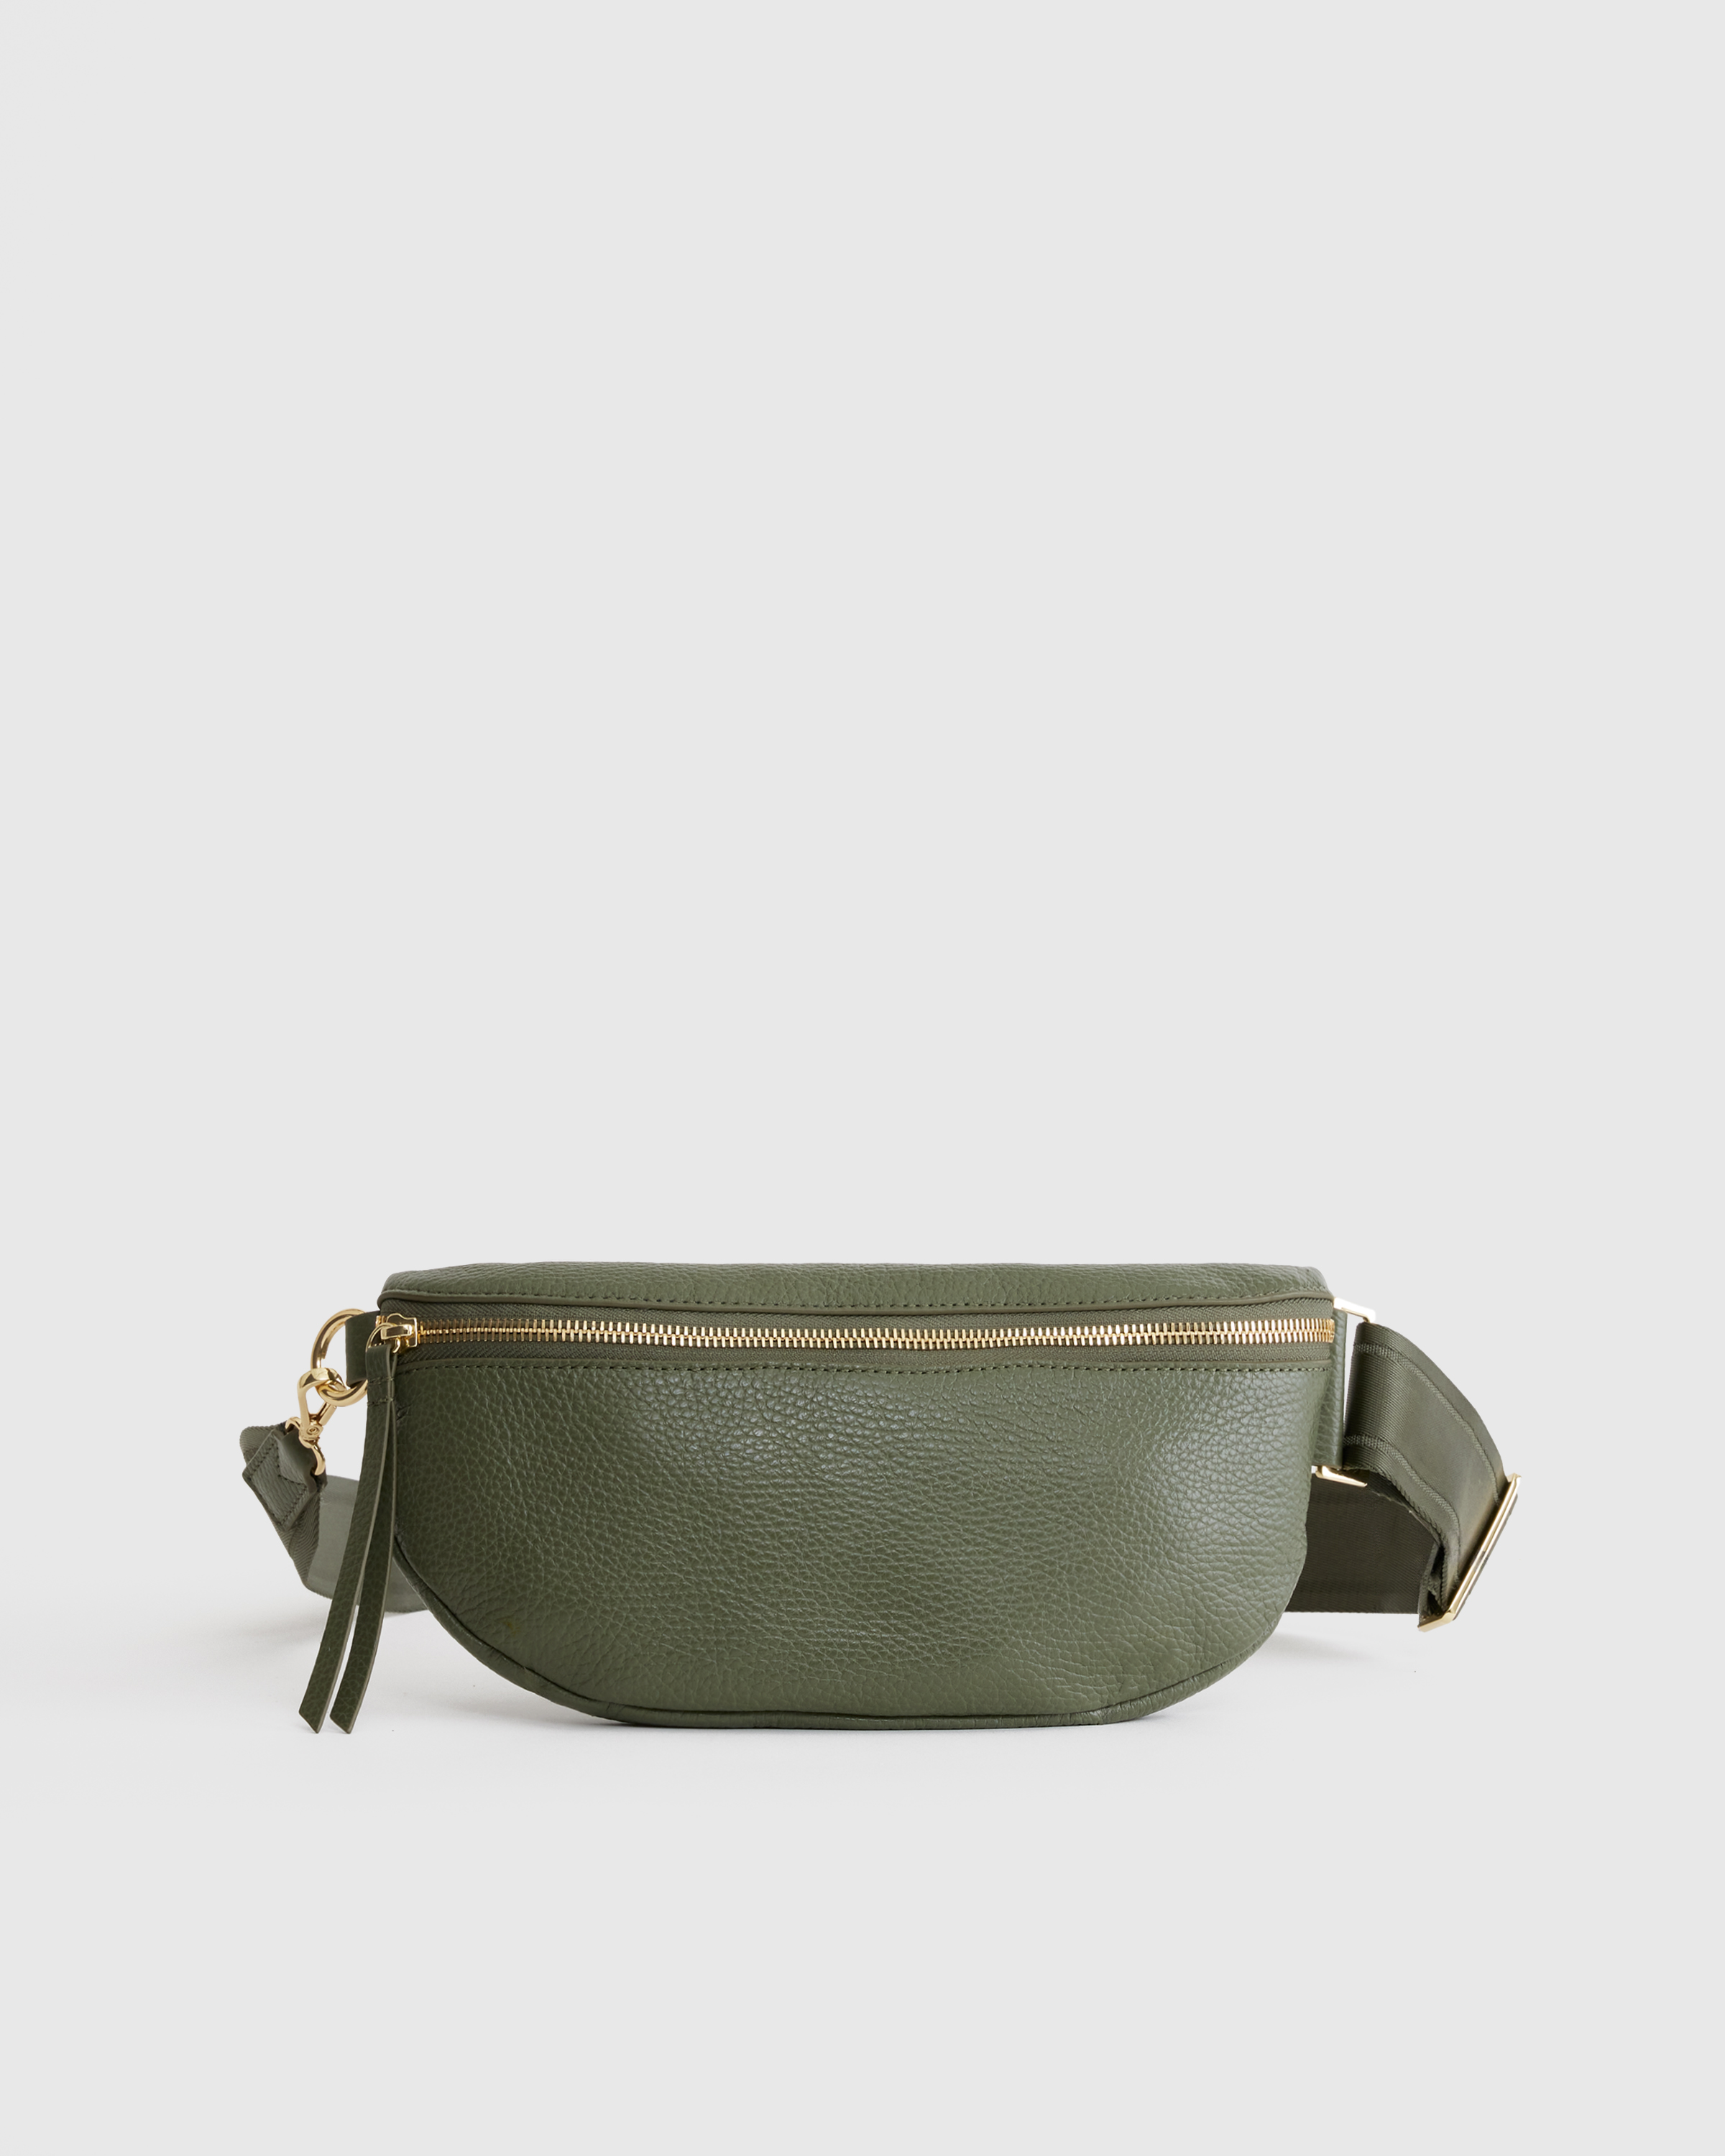 Quince Women's Italian Pebbled Leather Sling Bag In Olive